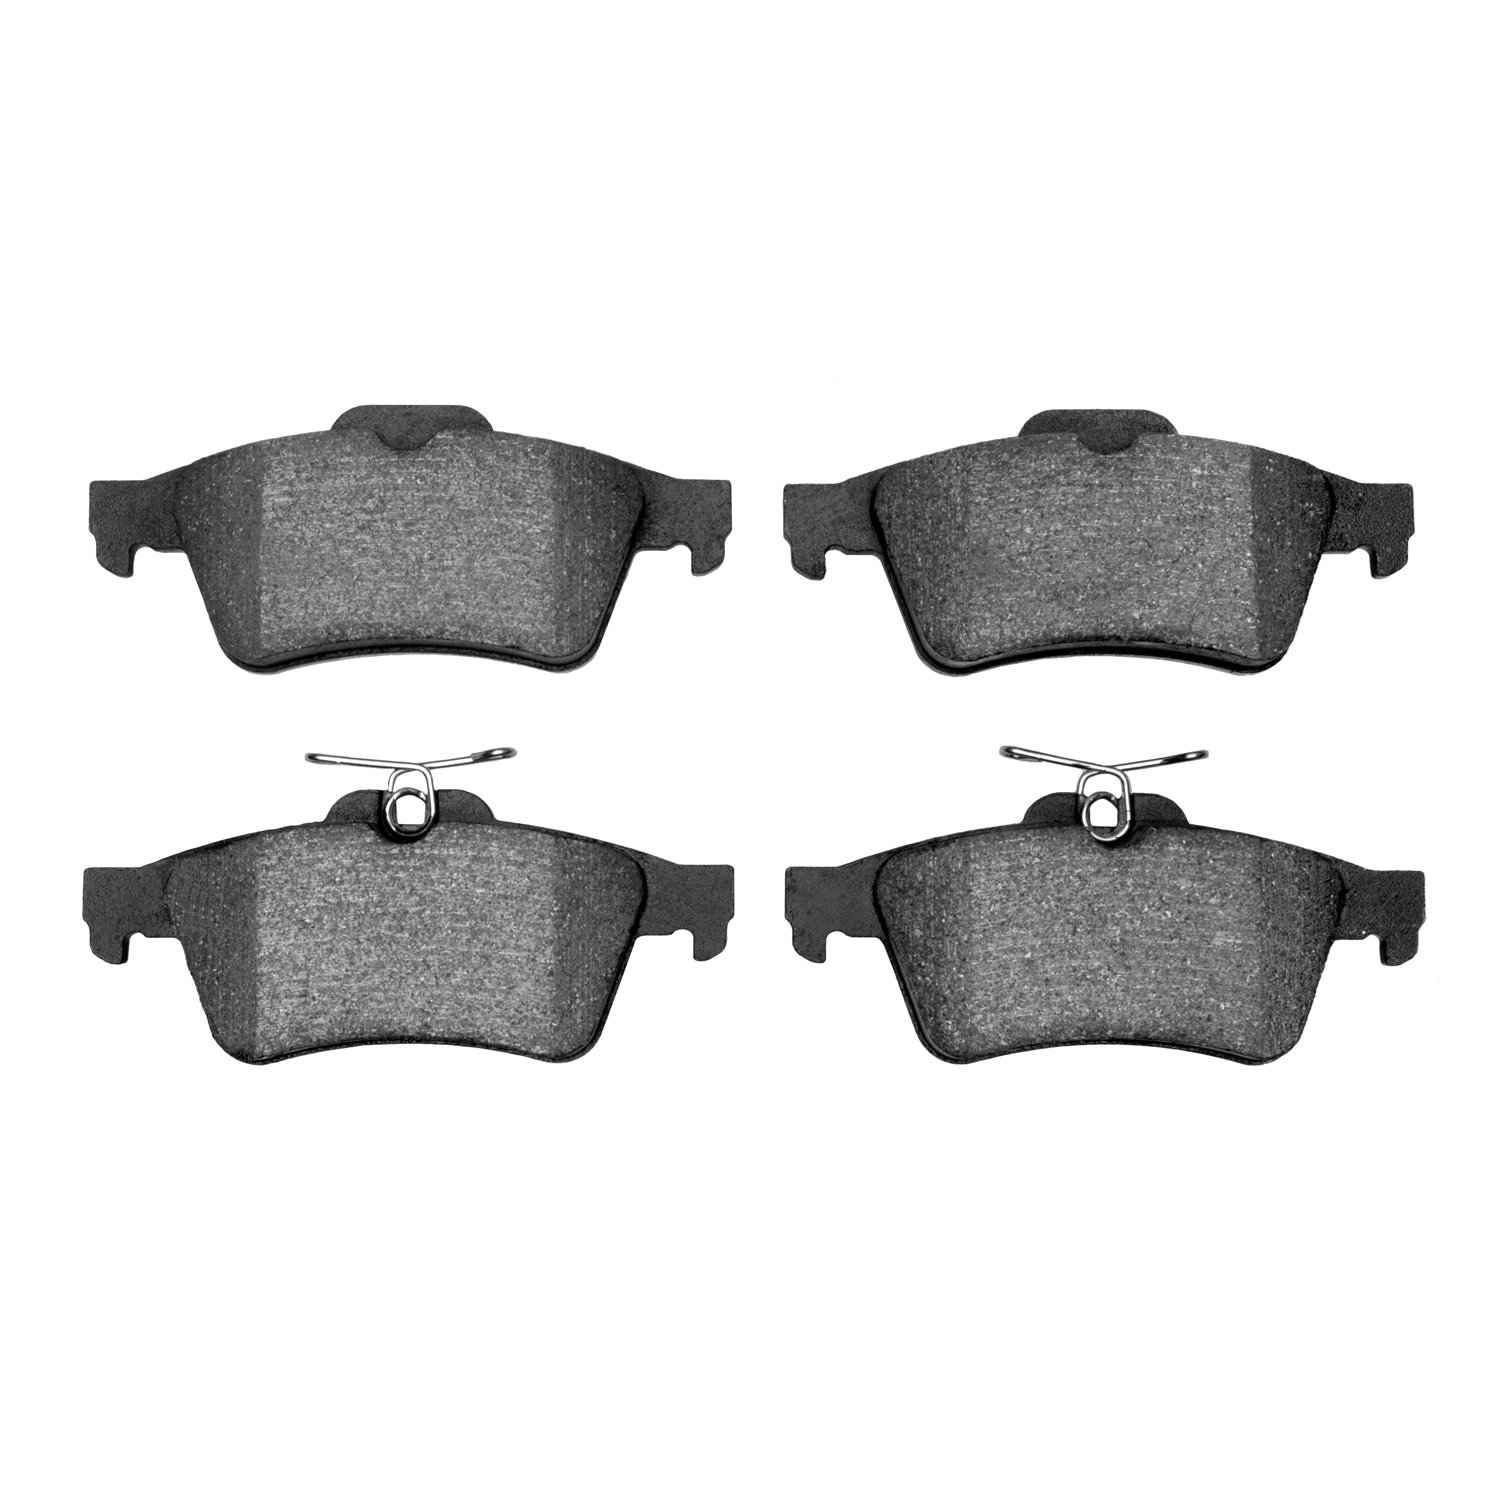 1115-1095-00 Active Performance Low-Metallic Brake Pads, Fits Select Multiple Makes/Models, Position: Rear